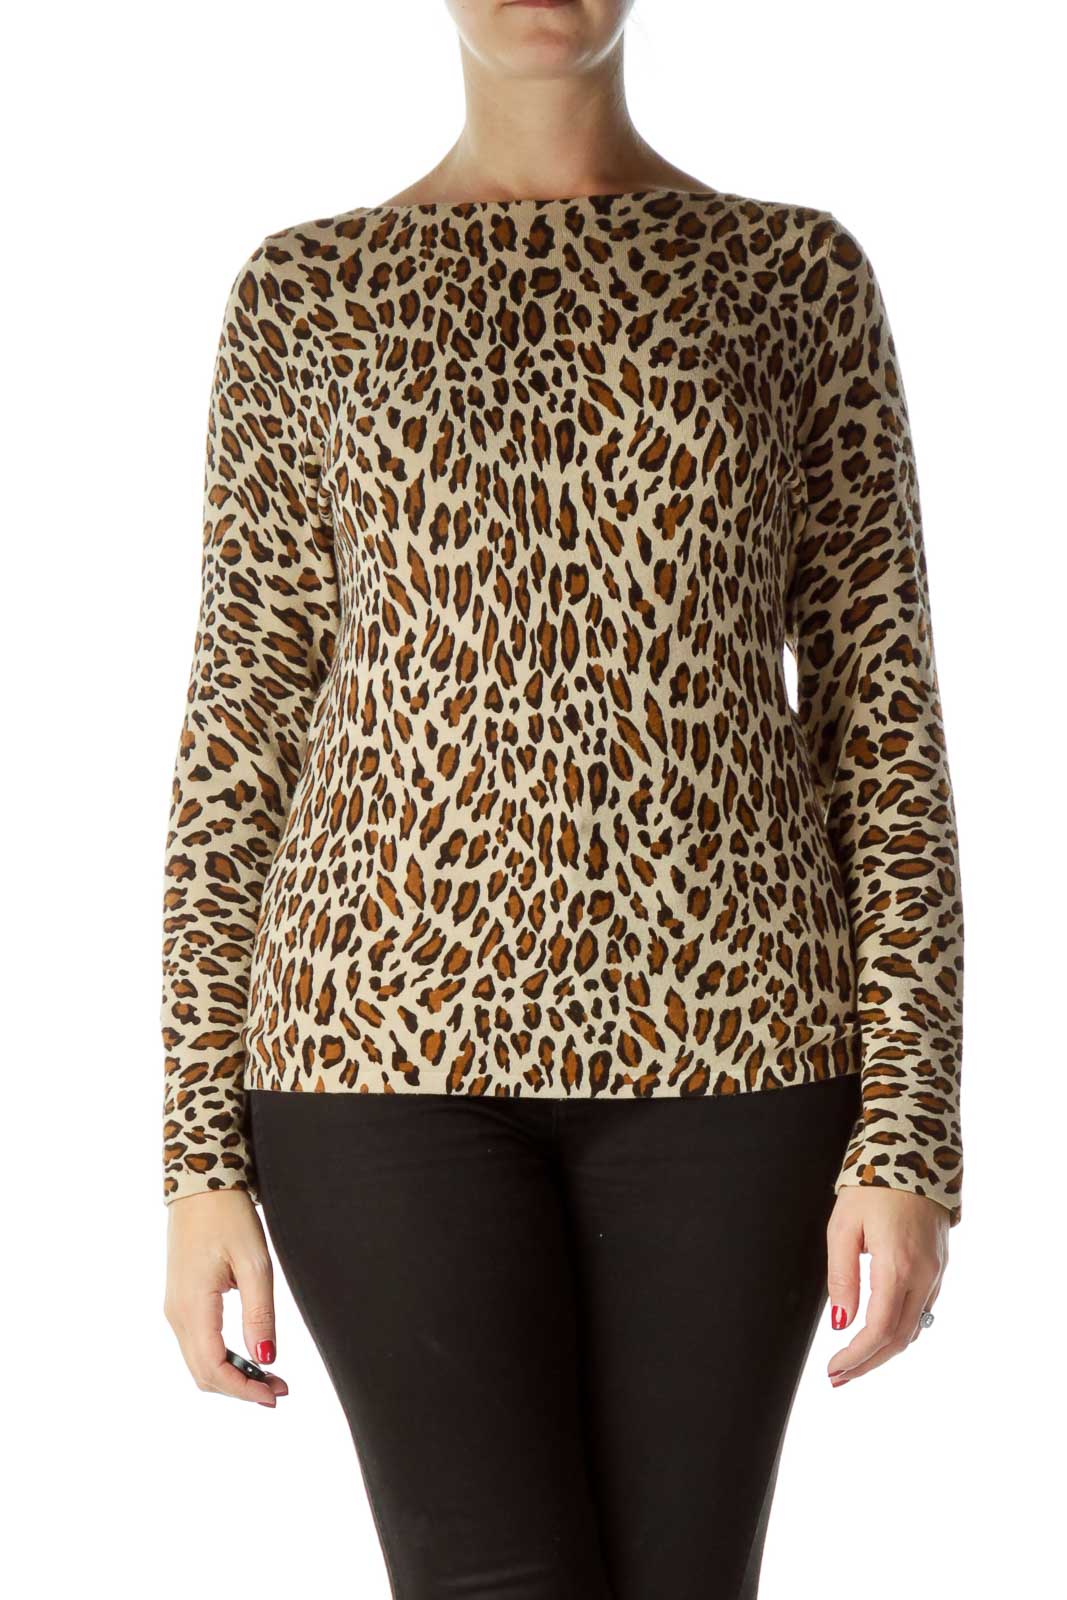 Brown Leopard Print Boat Neck Sweater Front